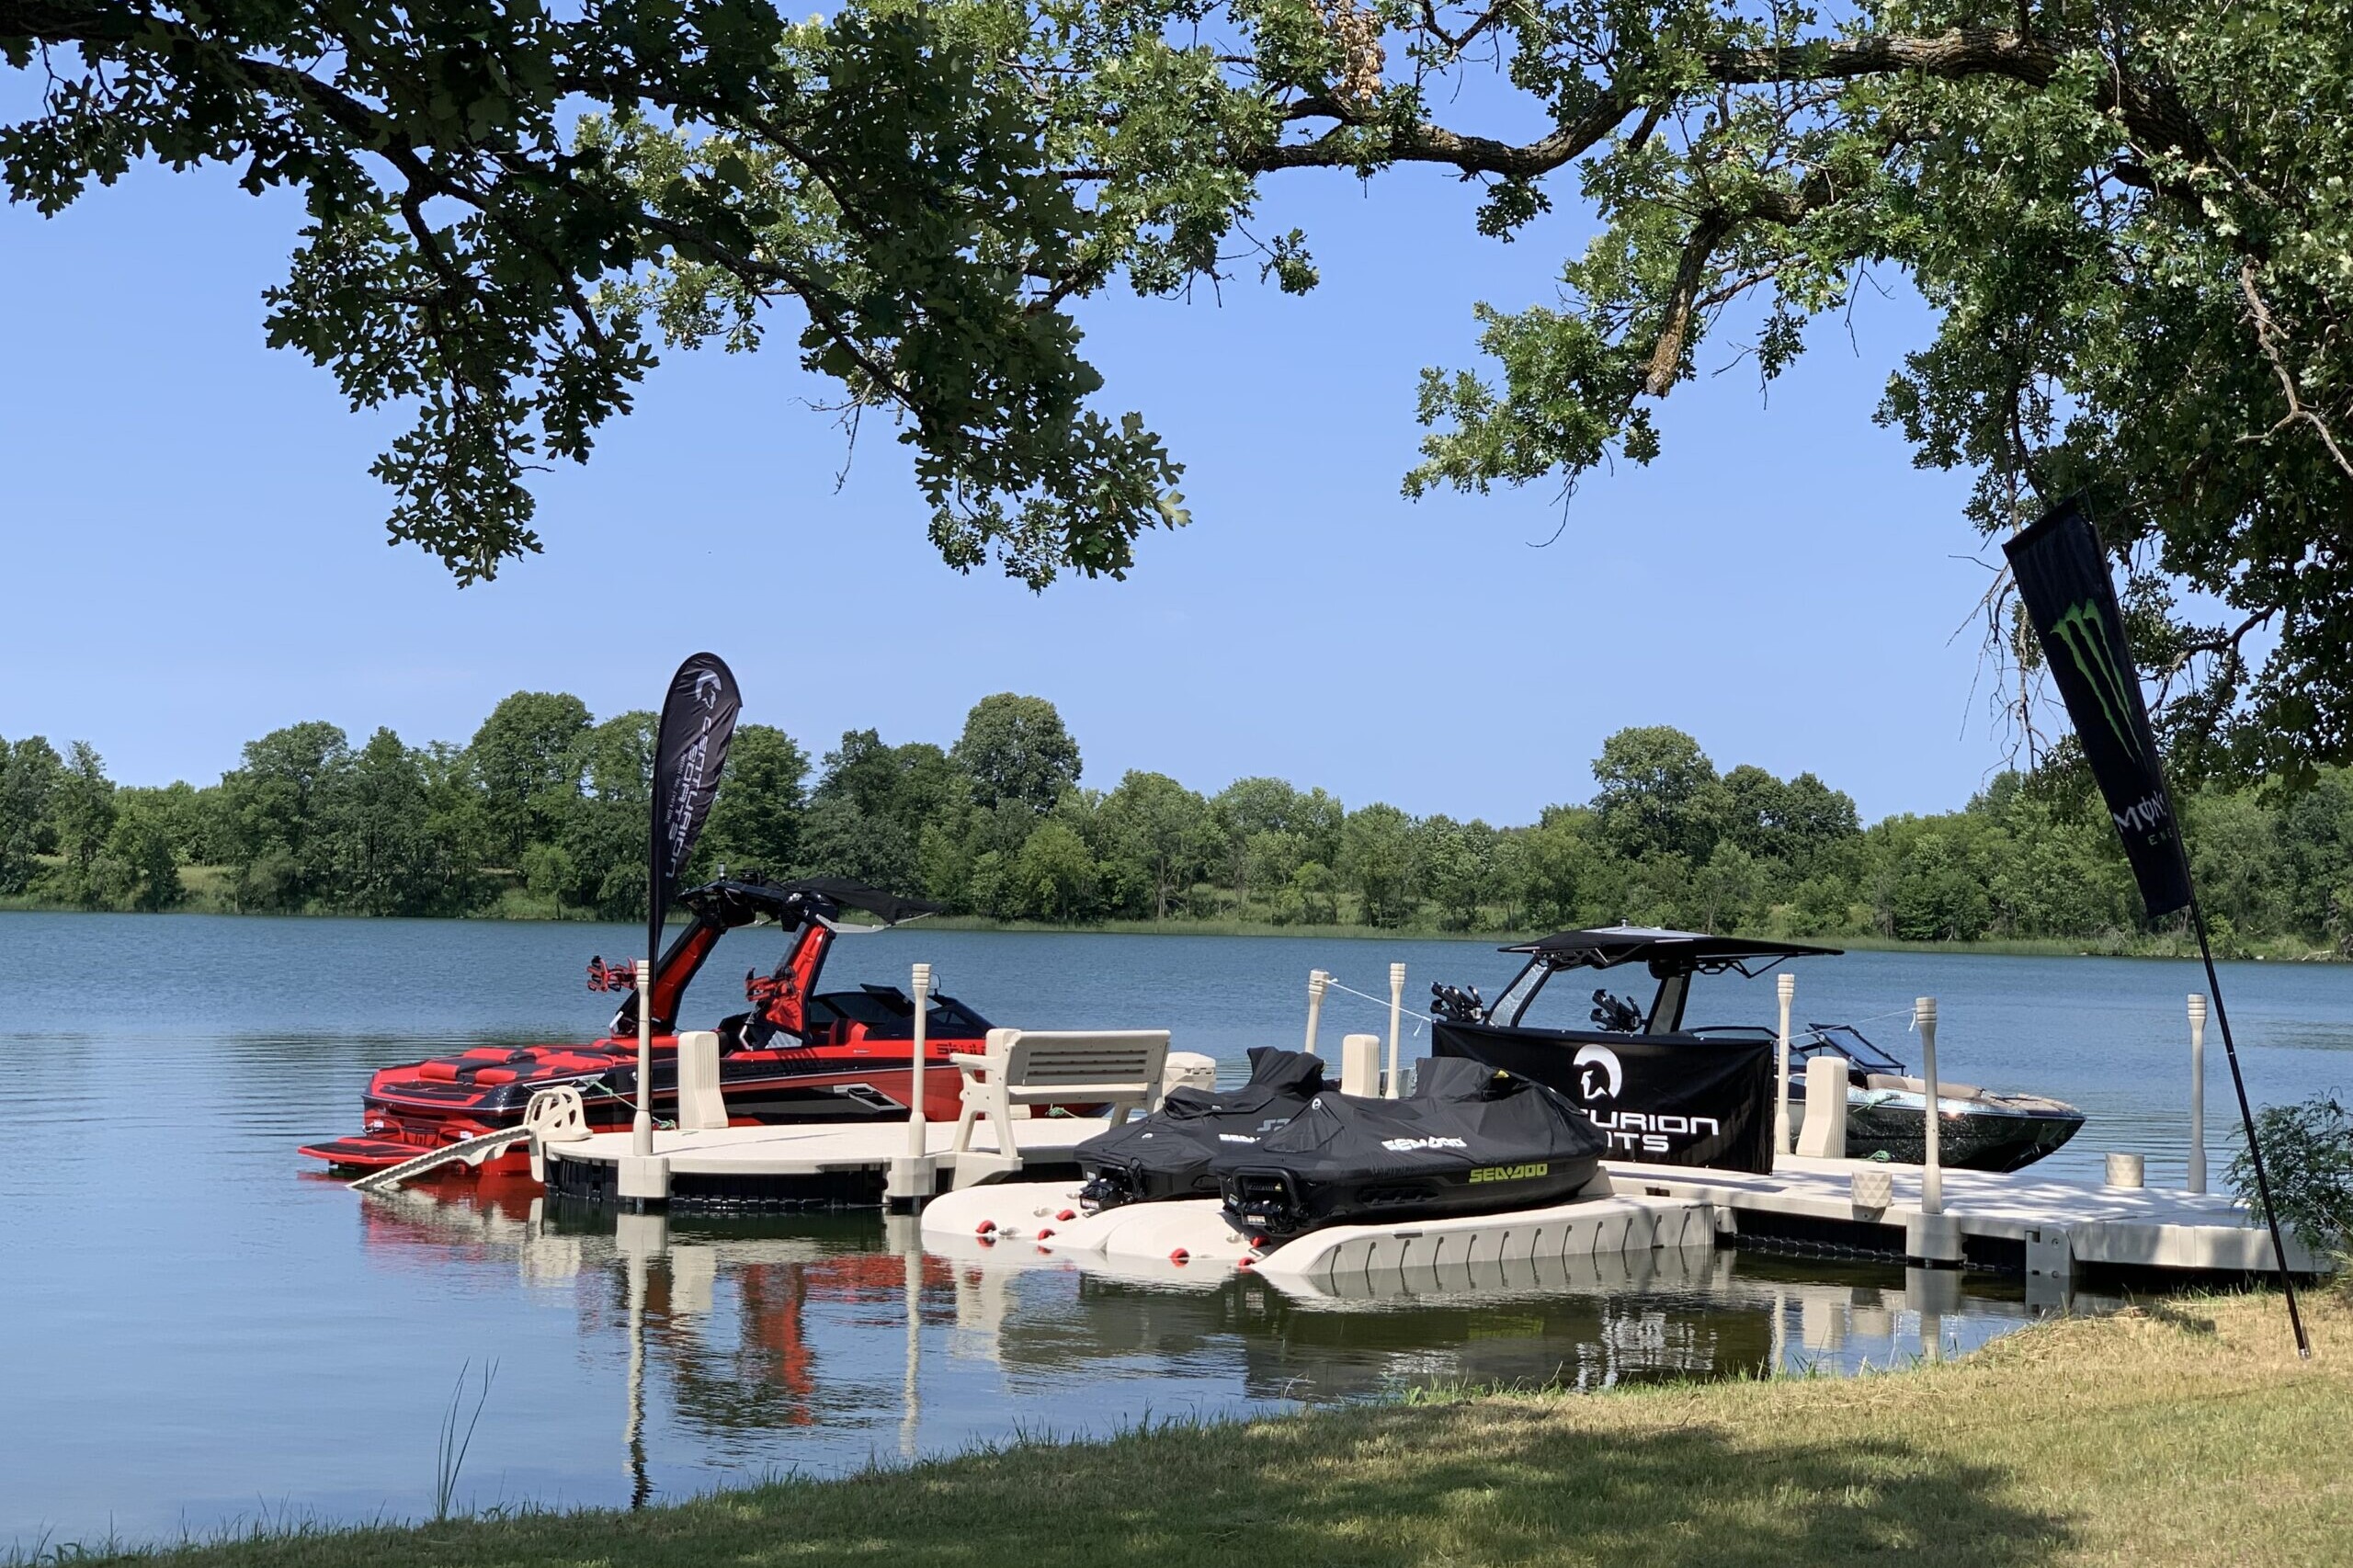 A lakeside scene with several boats and jet skis docked at a pier, some preparing for the King of the Lakes Classic. Trees frame the water, and flags from Surf MN and Faction Marine are visible near the boats under a clear, blue sky.